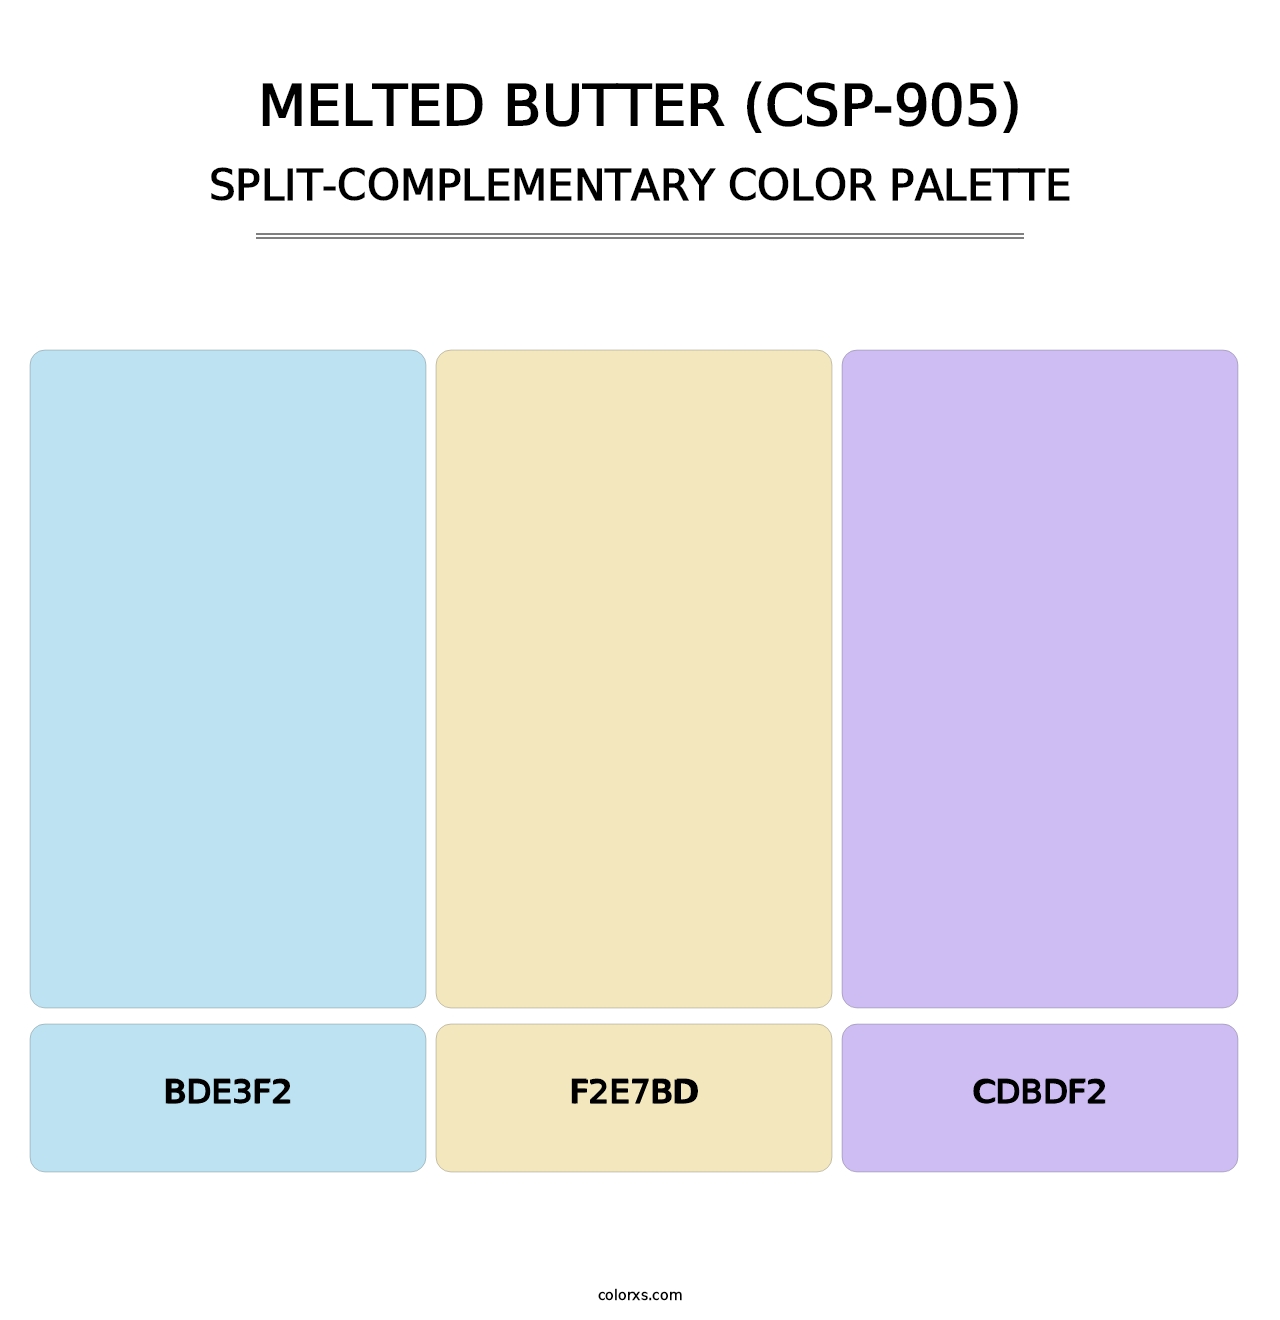 Melted Butter (CSP-905) - Split-Complementary Color Palette